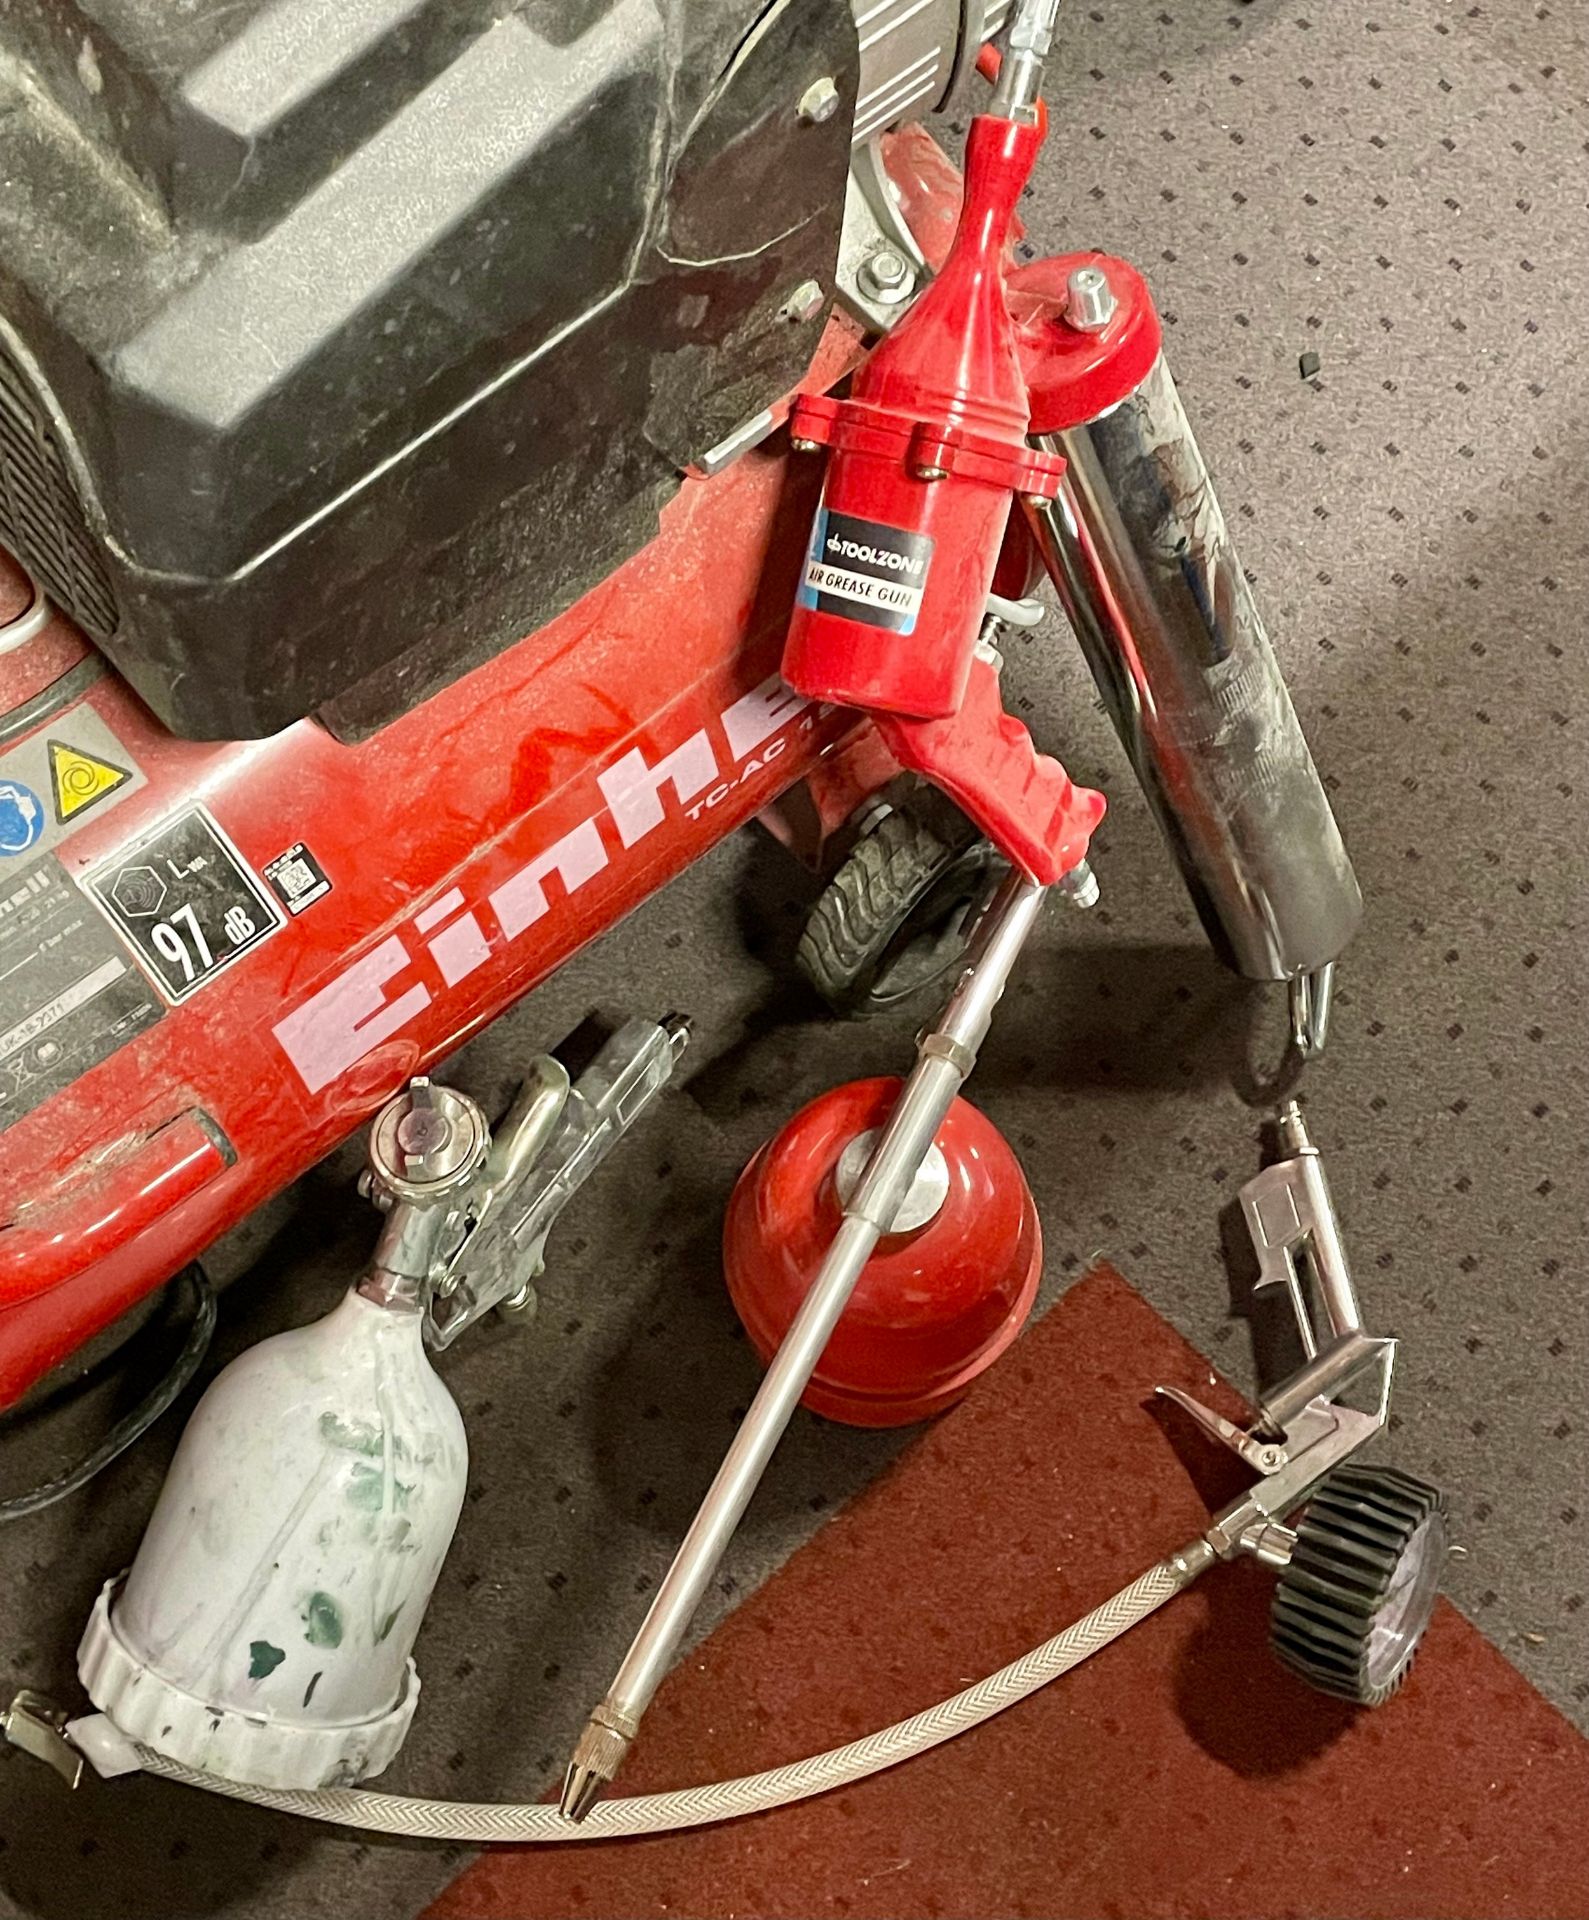 A Einhell 240 volt compressor, with associated airlines, grease gun and paint gun. - Image 3 of 3